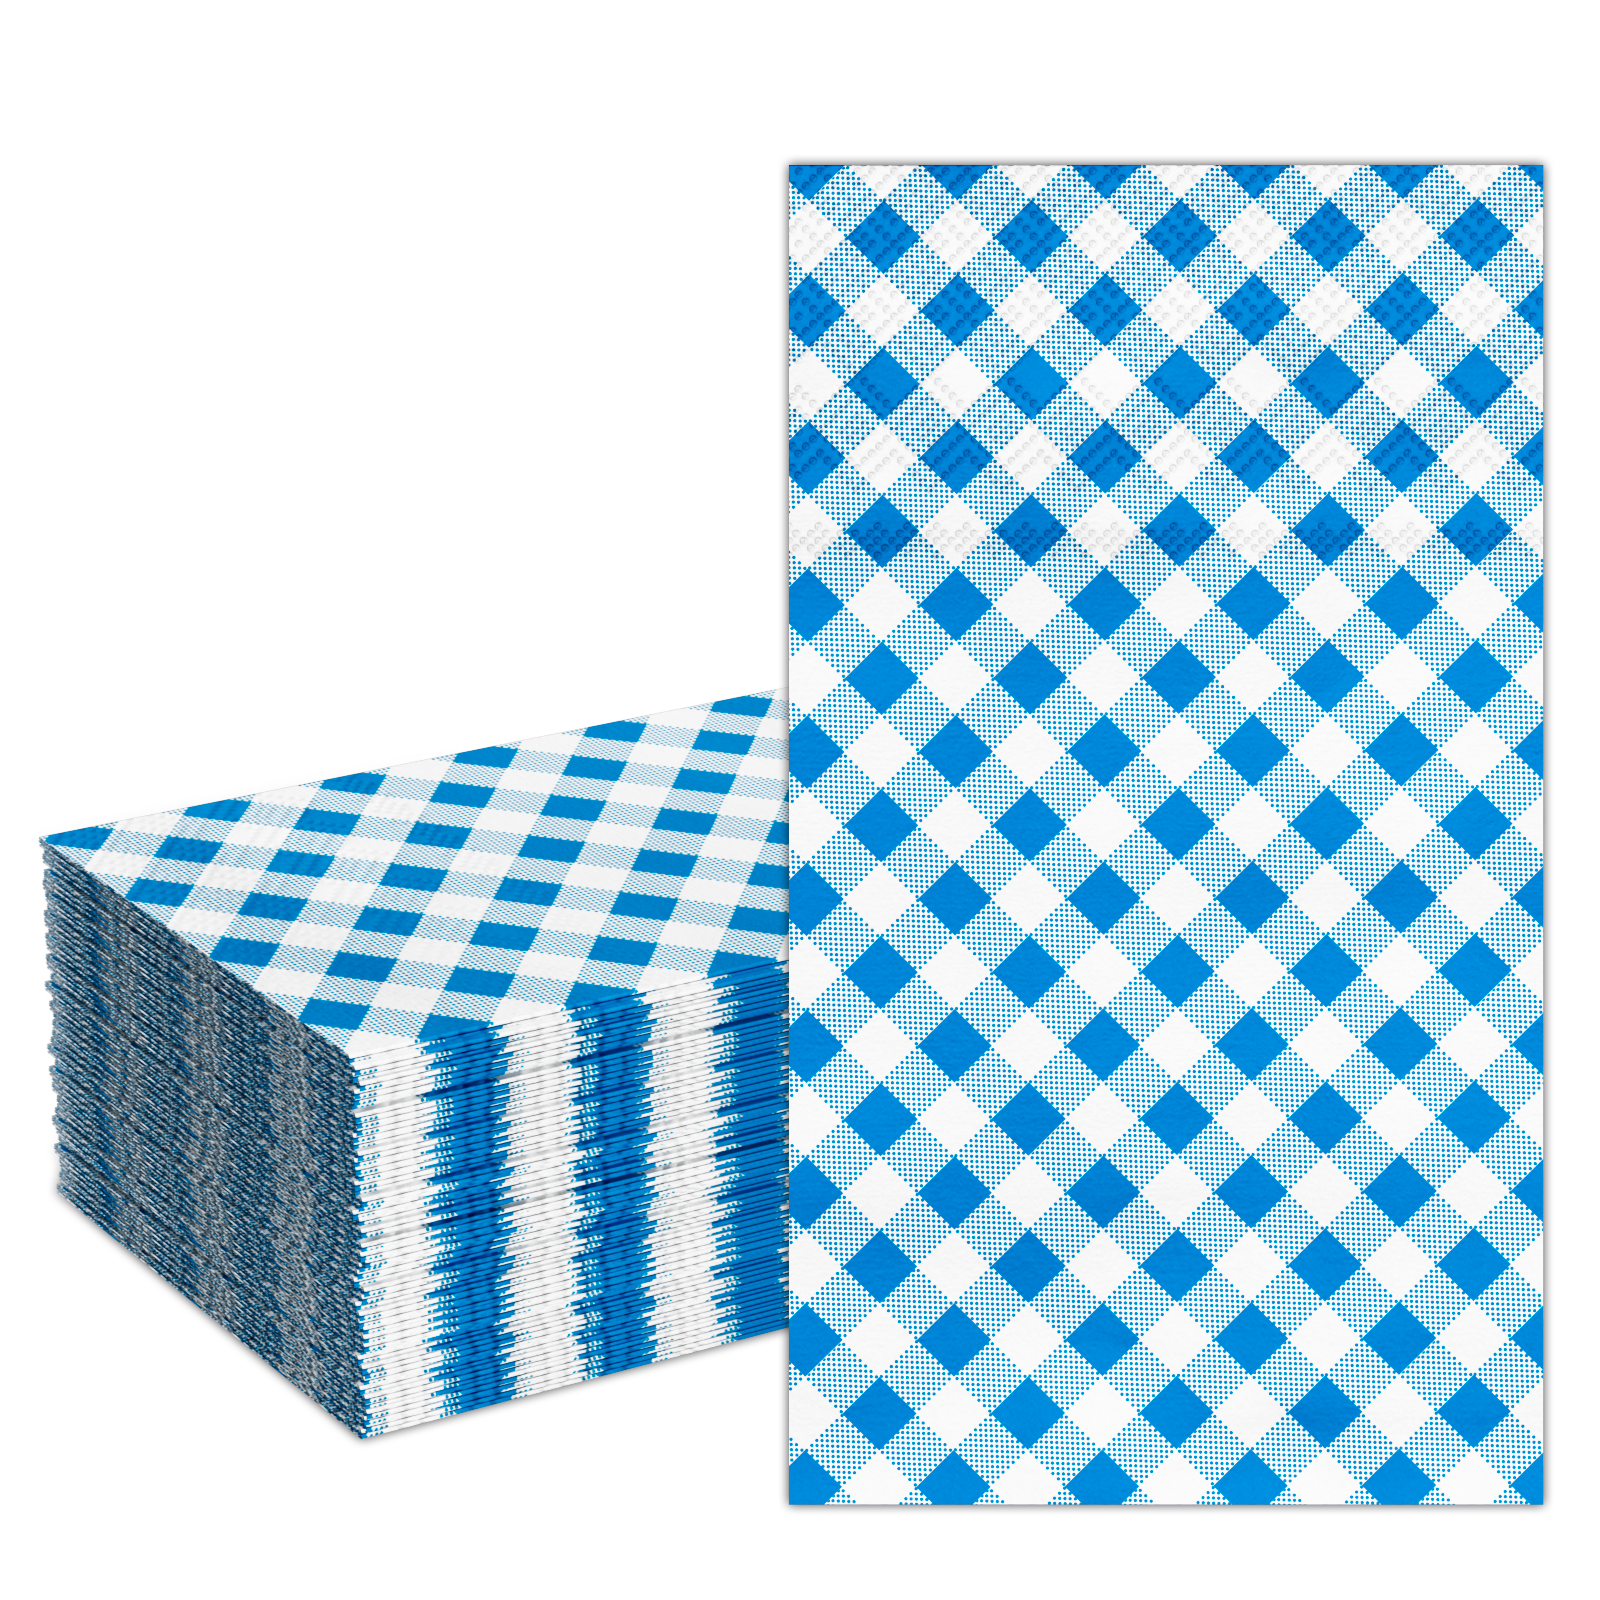 DYLIVeS 50 Count Gingham Dinner Napkins 3 Ply Disposable Paper Hand Napkins Blue Buffalo plaid Napkins Disposable Towels Blue and White Checkered Guest Napkins - image 1 of 7